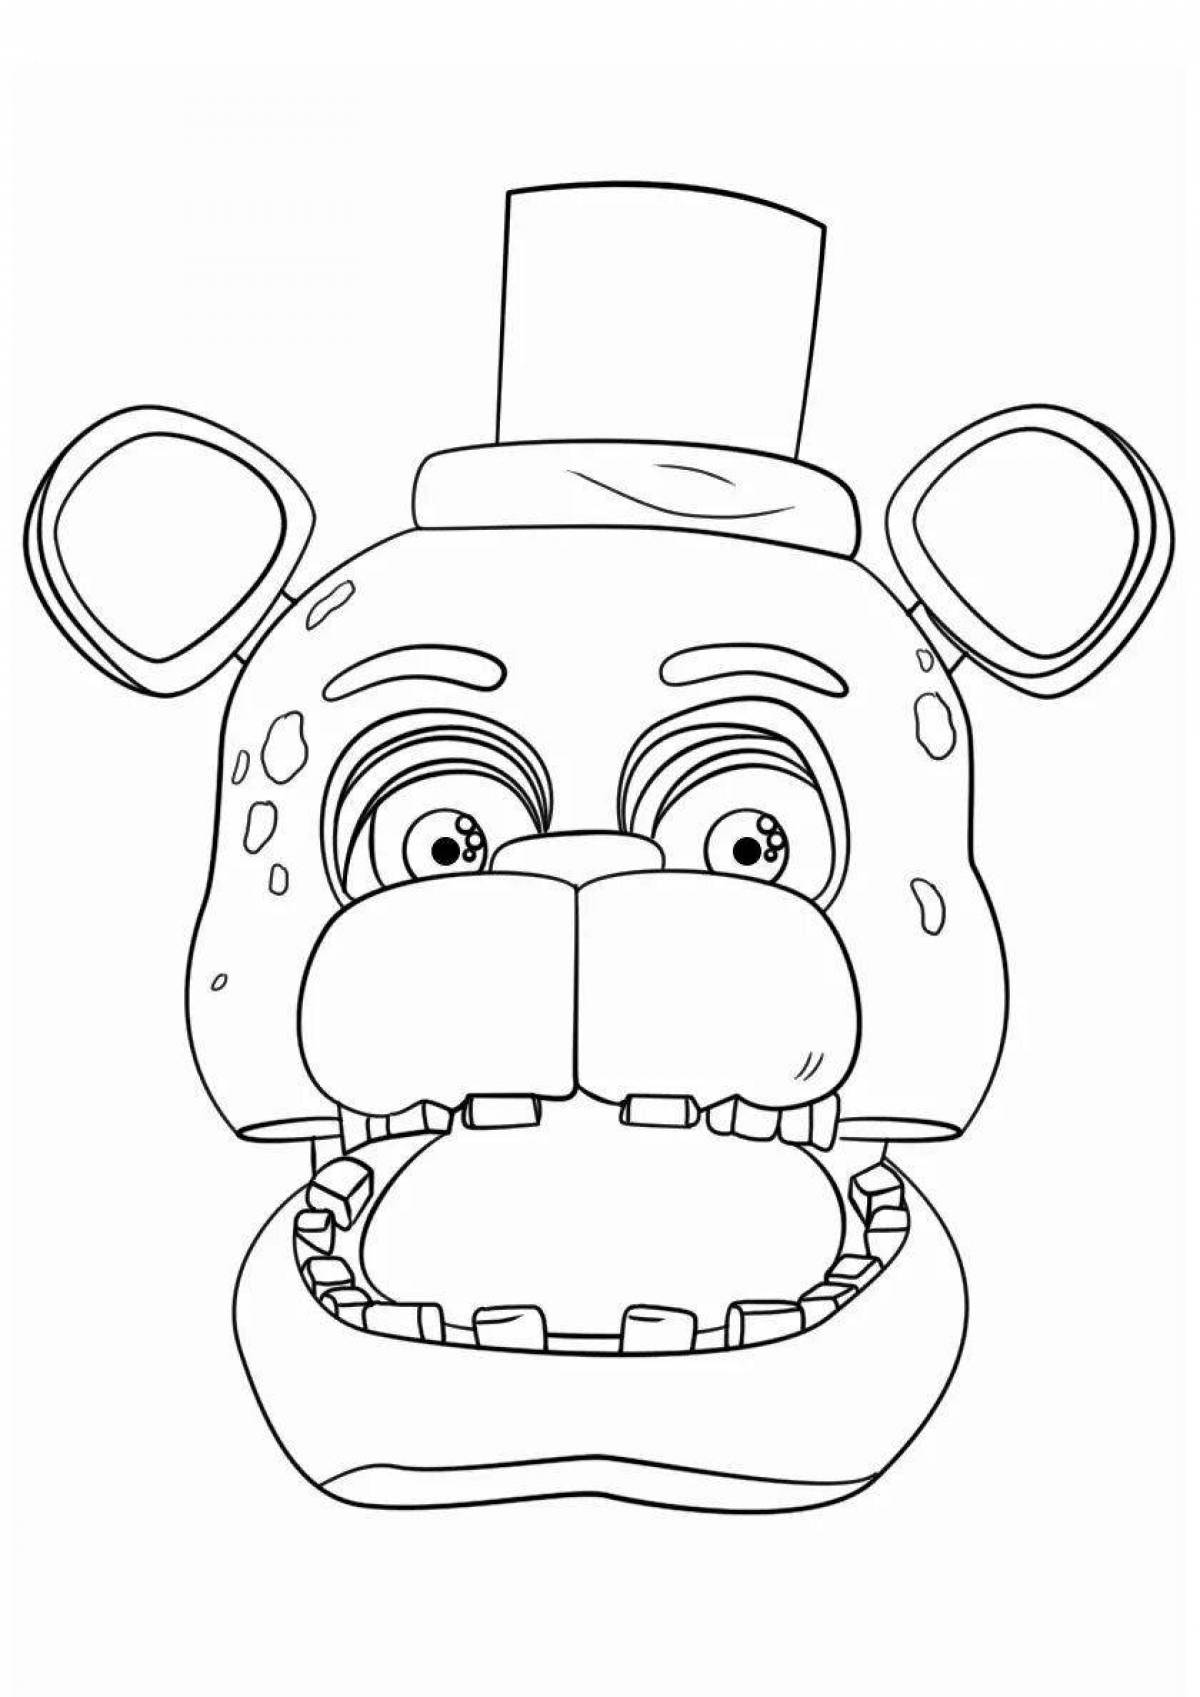 Coloring page nice bonnie mask